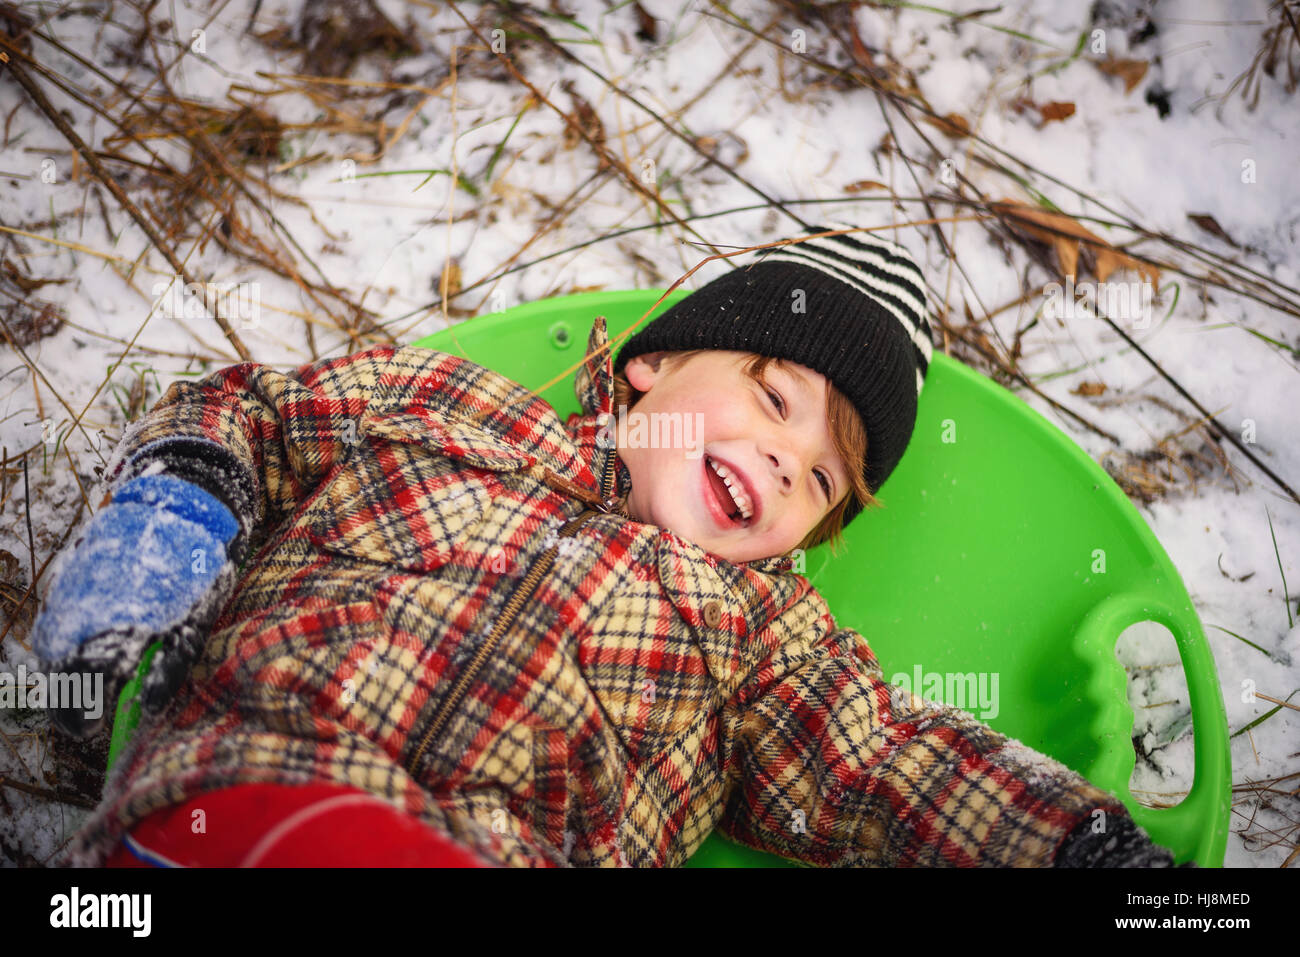 Boy lying in a sledge laughing Stock Photo